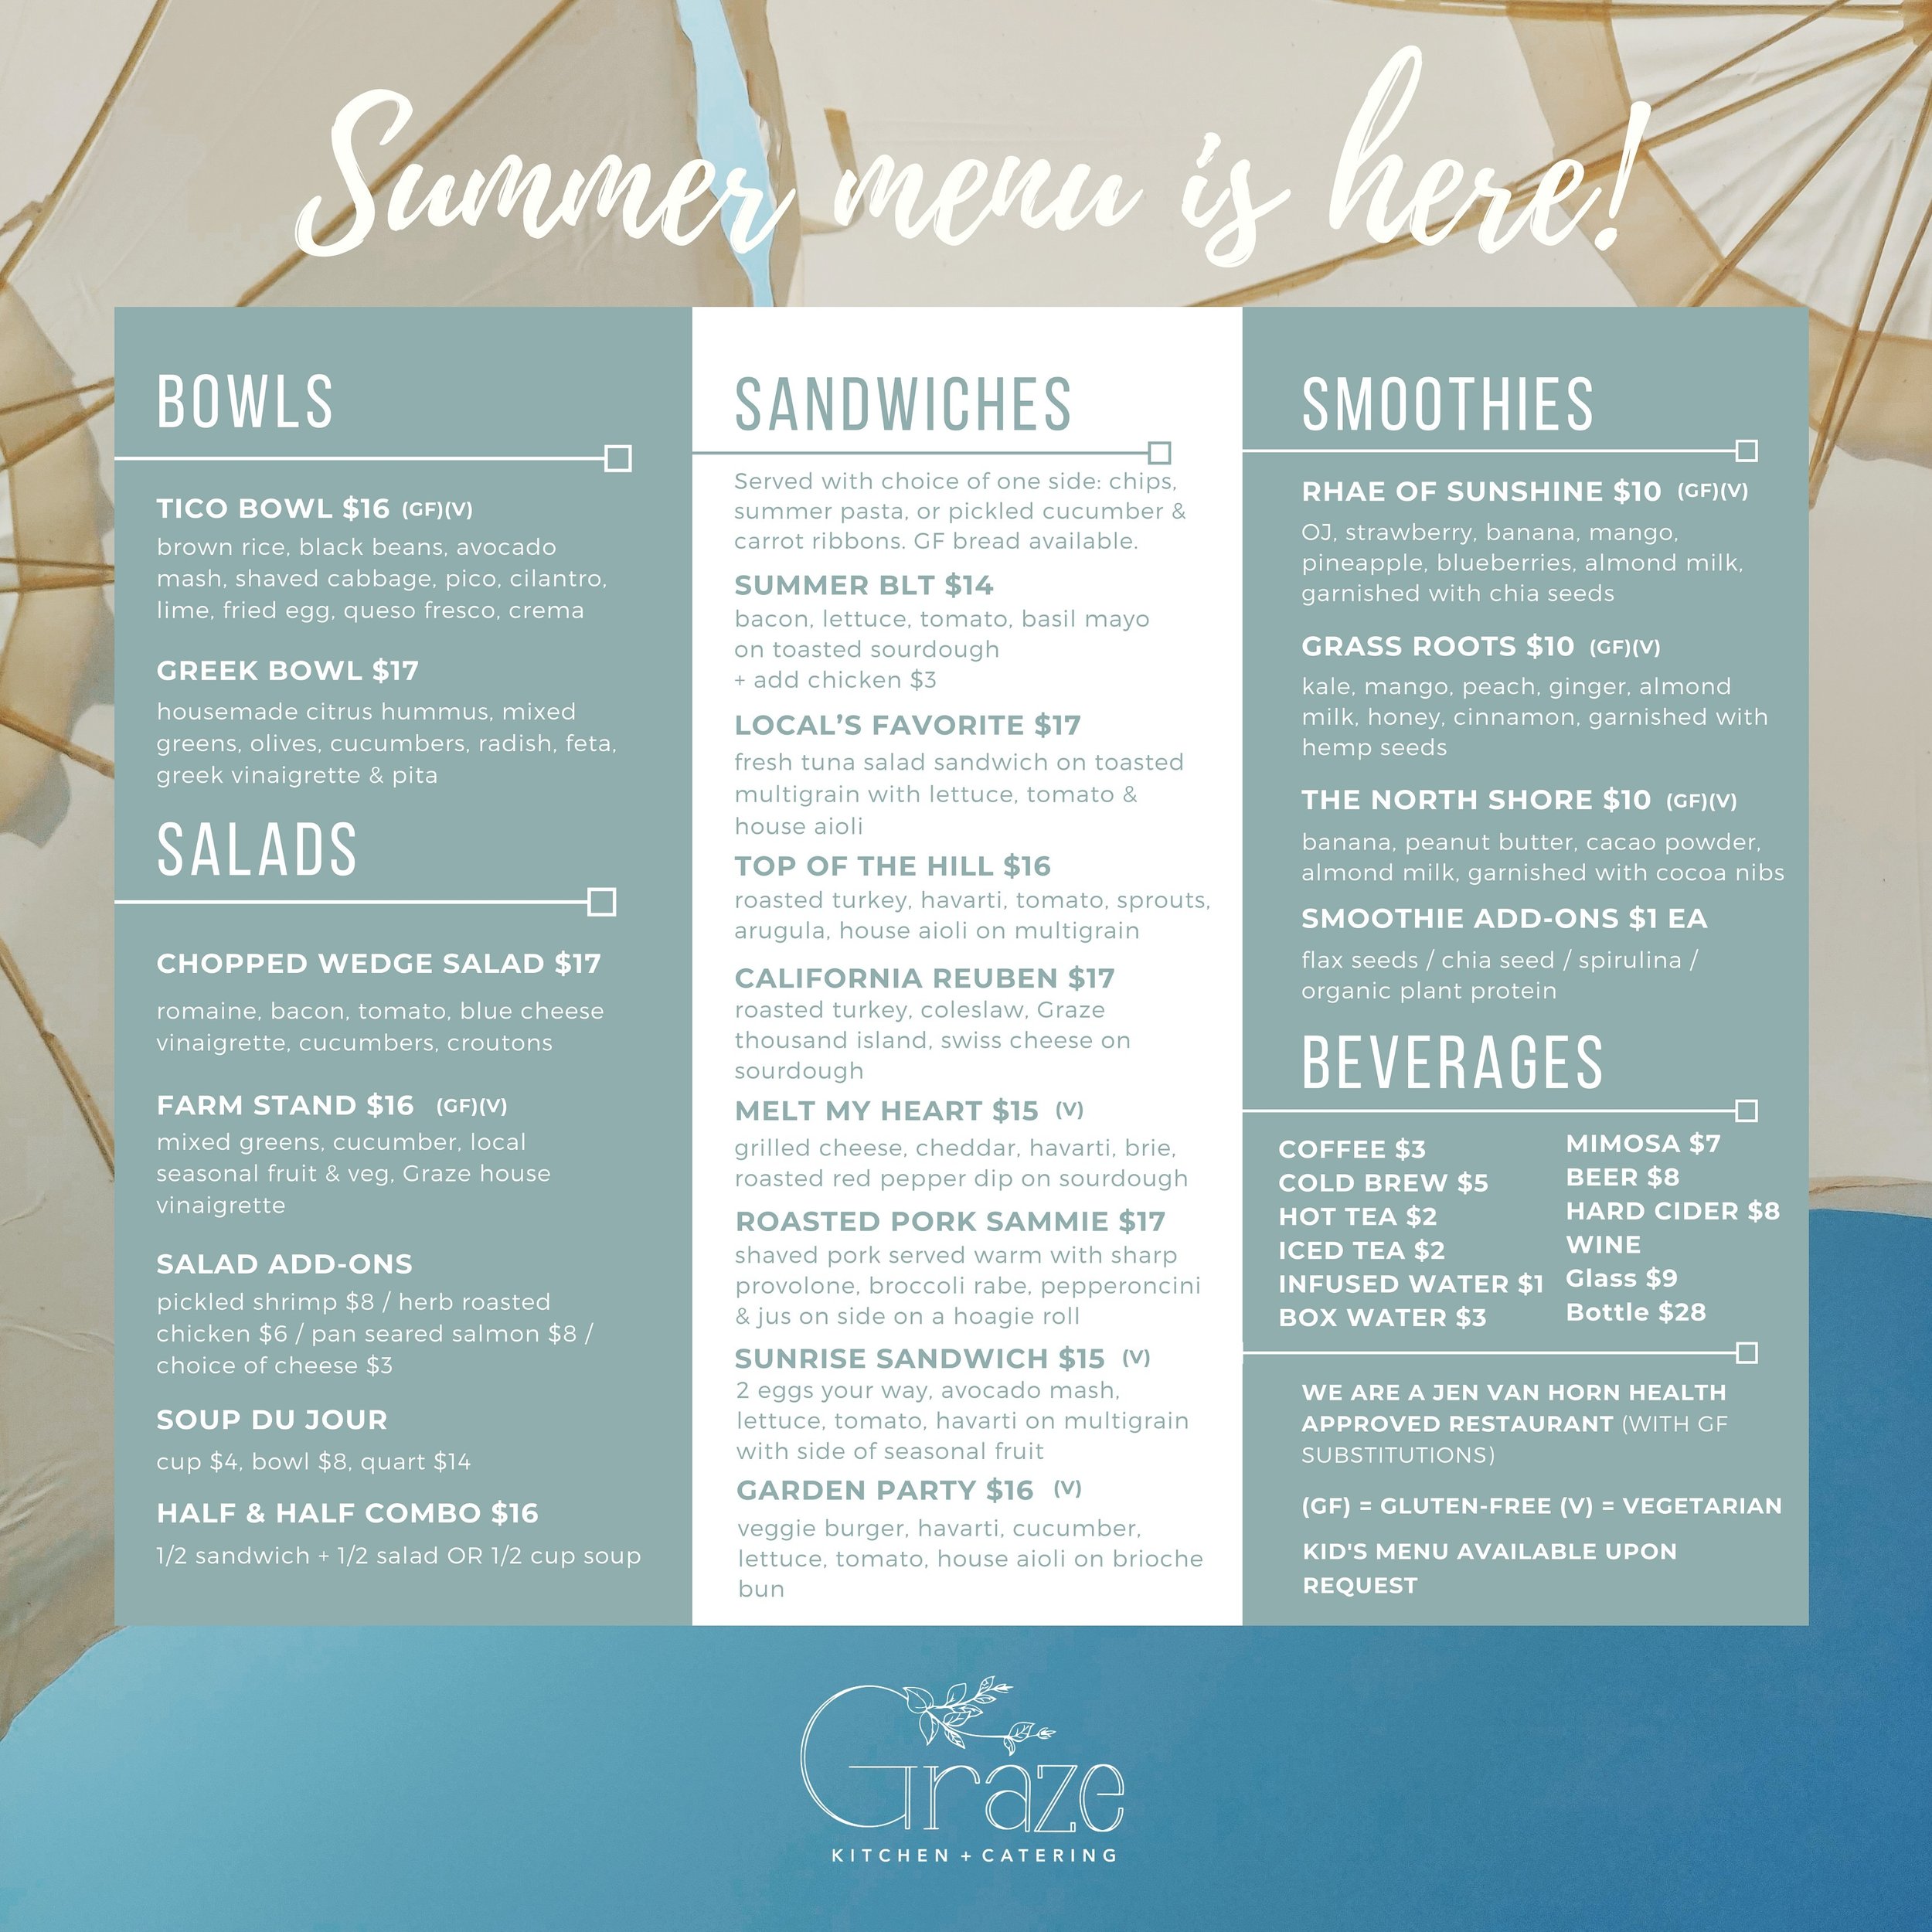 If you were looking for a reason to come by today, this is it. Our SUMMER MENU is here! ☀️🌻

Open 11-3pm today. Tag a friend you want to bring to lunch! 

#dontforgettosaygraze #grazekitchenvb #757eats #757foodie